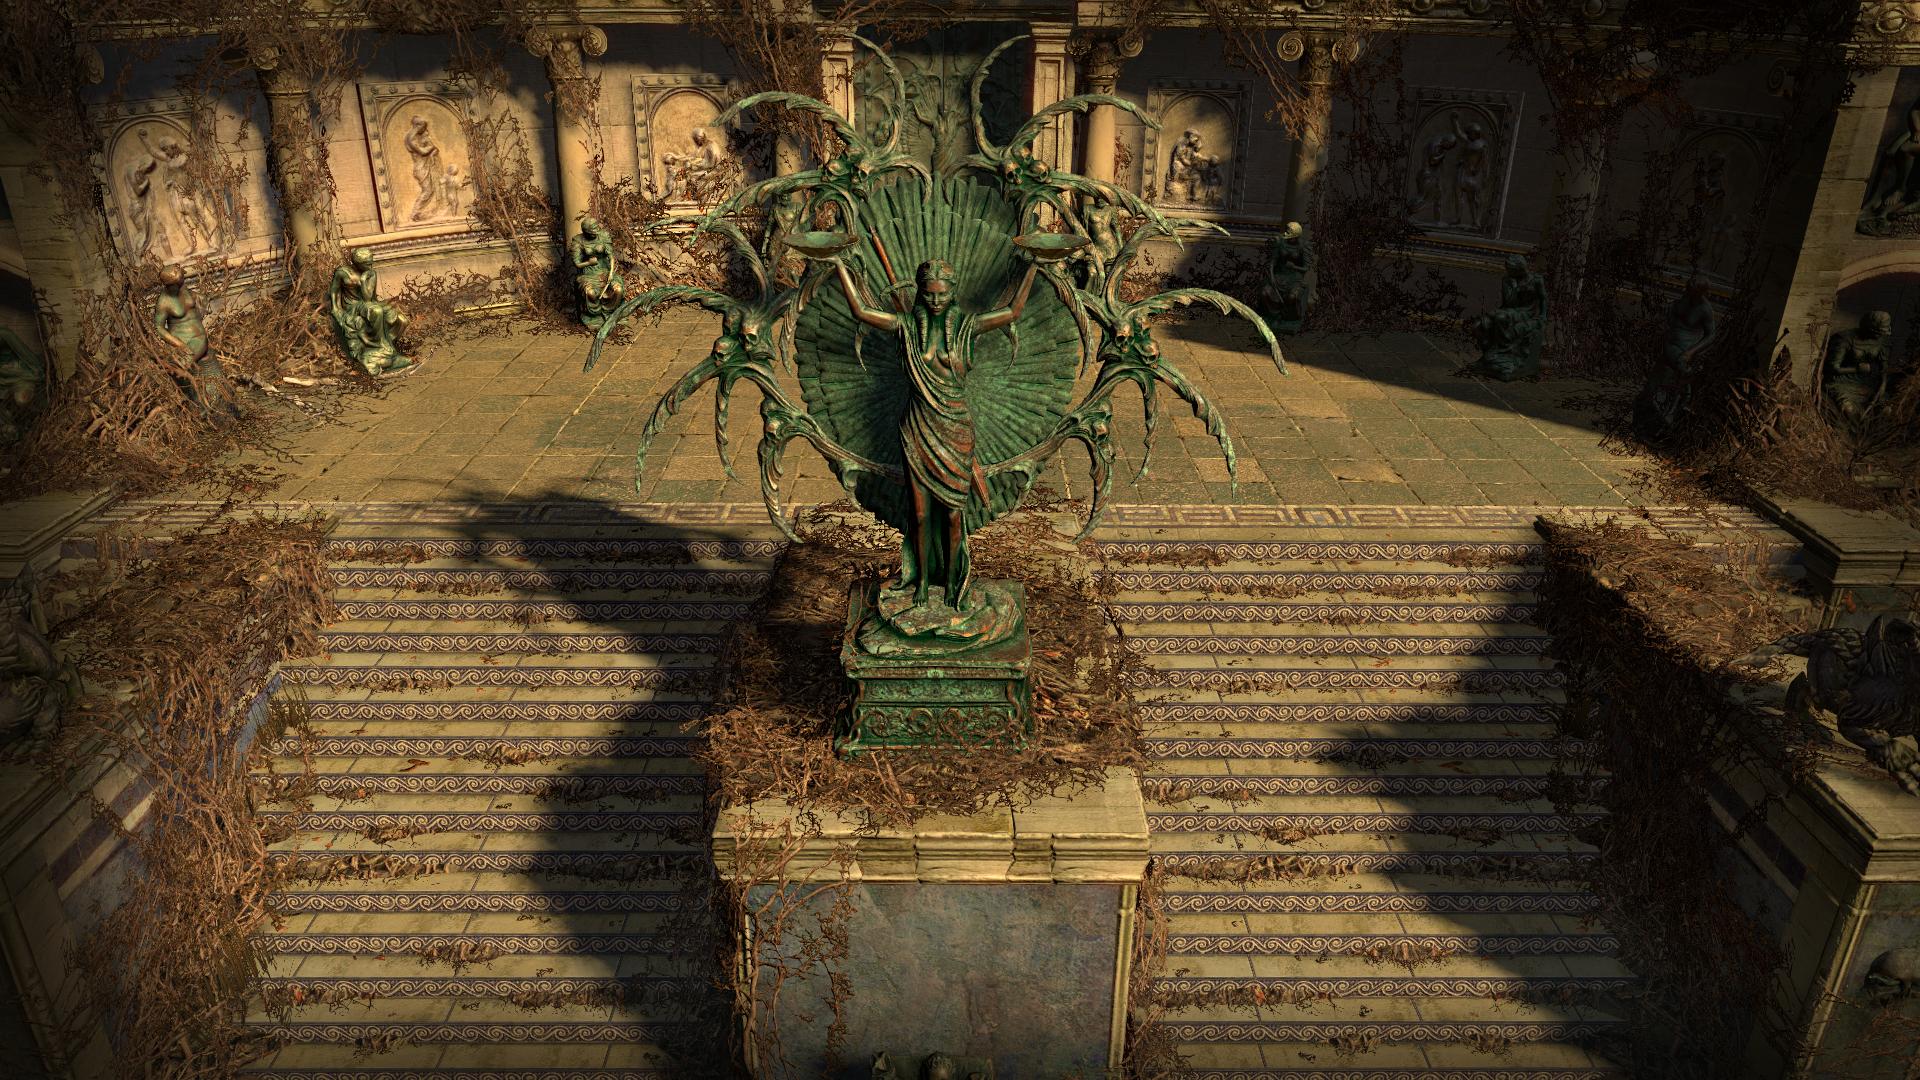 Screenshot №33 from game Path of Exile